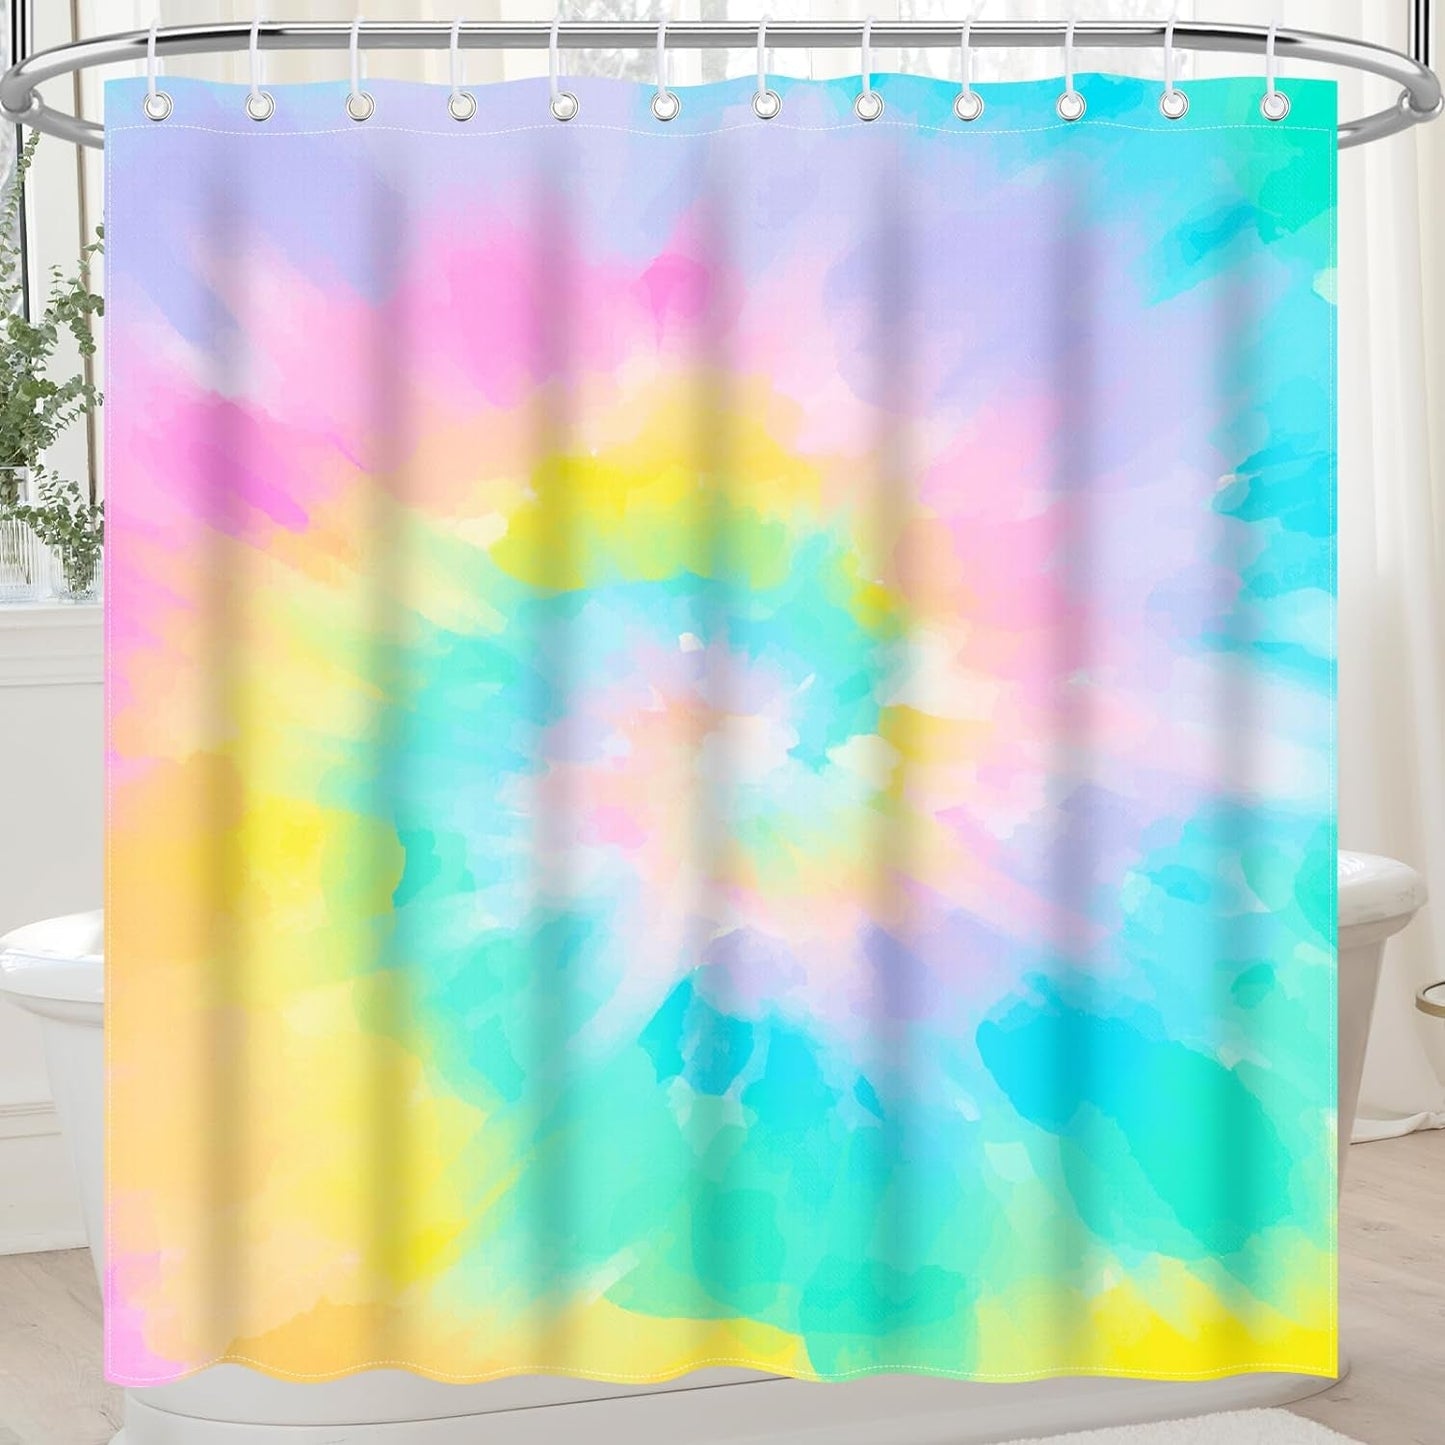 Nidoul Pink Shower Curtain for Bathroom Cute Wavy Swirl 70S Abstract Retro Vintage Preppy Aesthetic Fabric Waterproof Bathroom Shower Curtains Set with Hooks 72X72 Inch